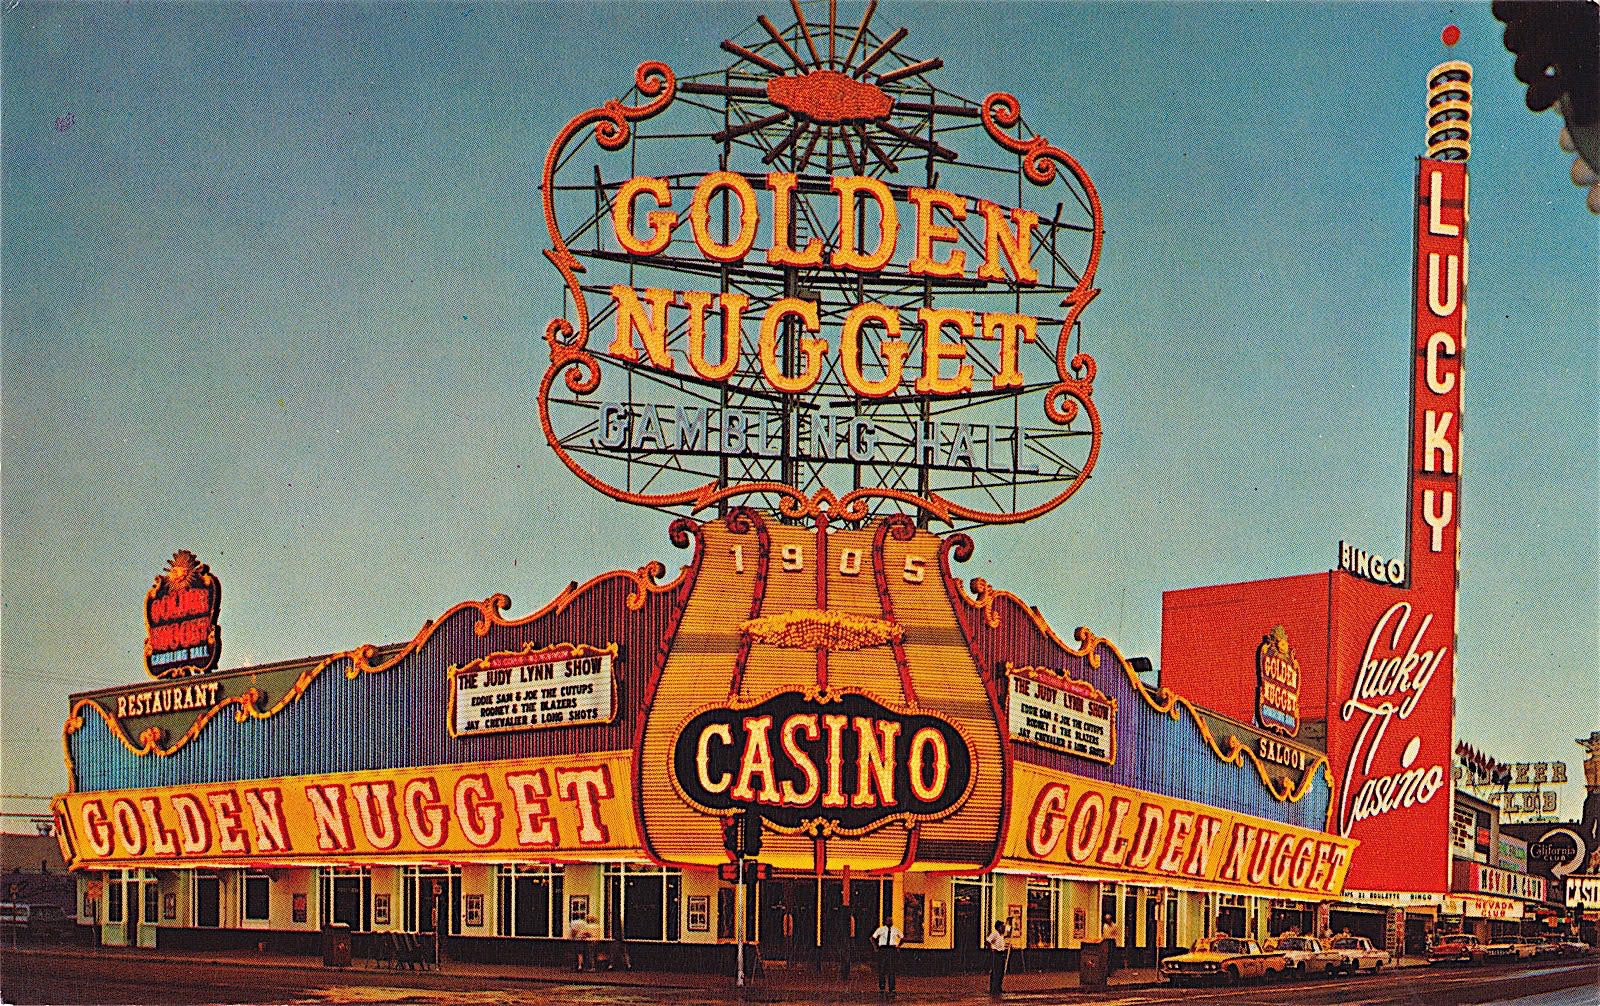 The Golden Nugget, ca. 1965